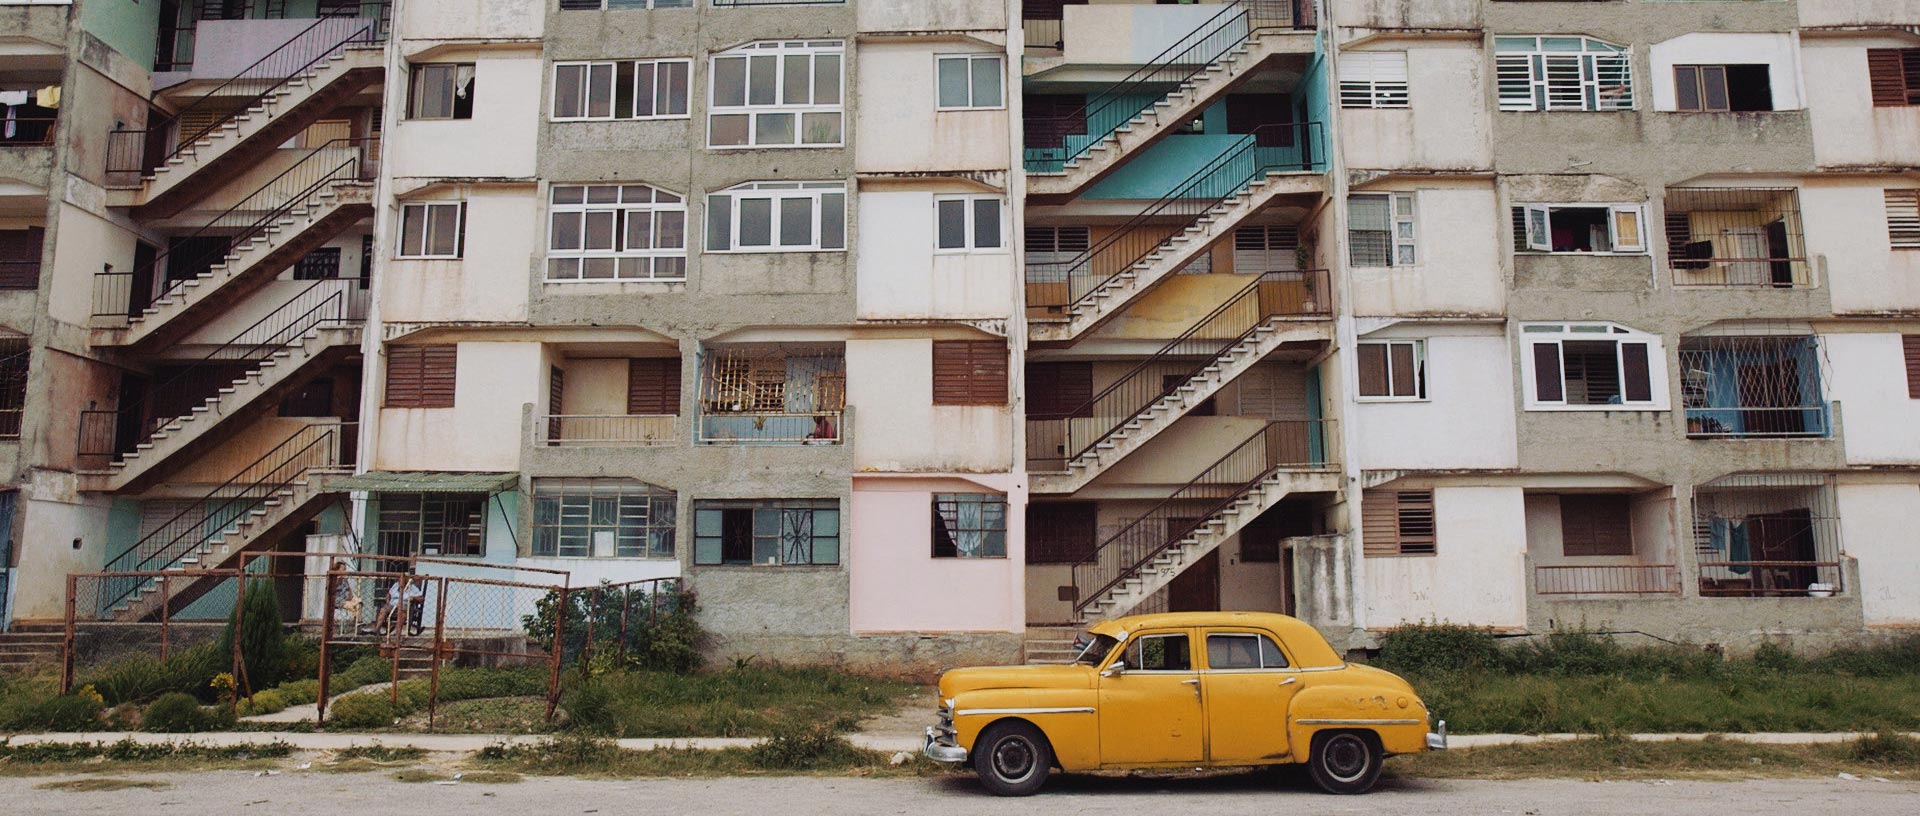 Apartments and yellow car